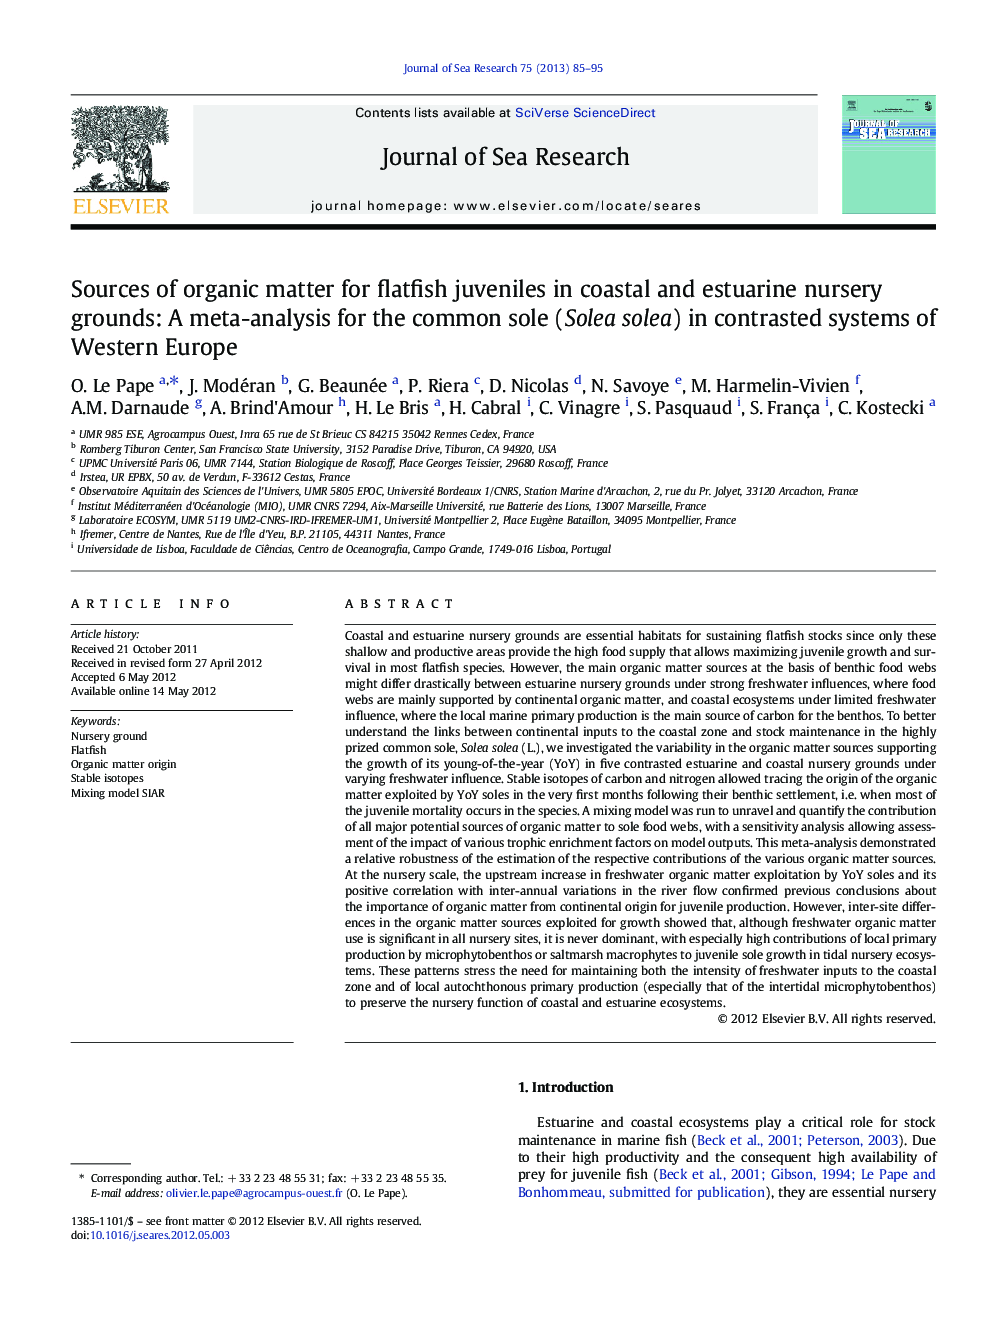 Sources of organic matter for flatfish juveniles in coastal and estuarine nursery grounds: A meta-analysis for the common sole (Solea solea) in contrasted systems of Western Europe